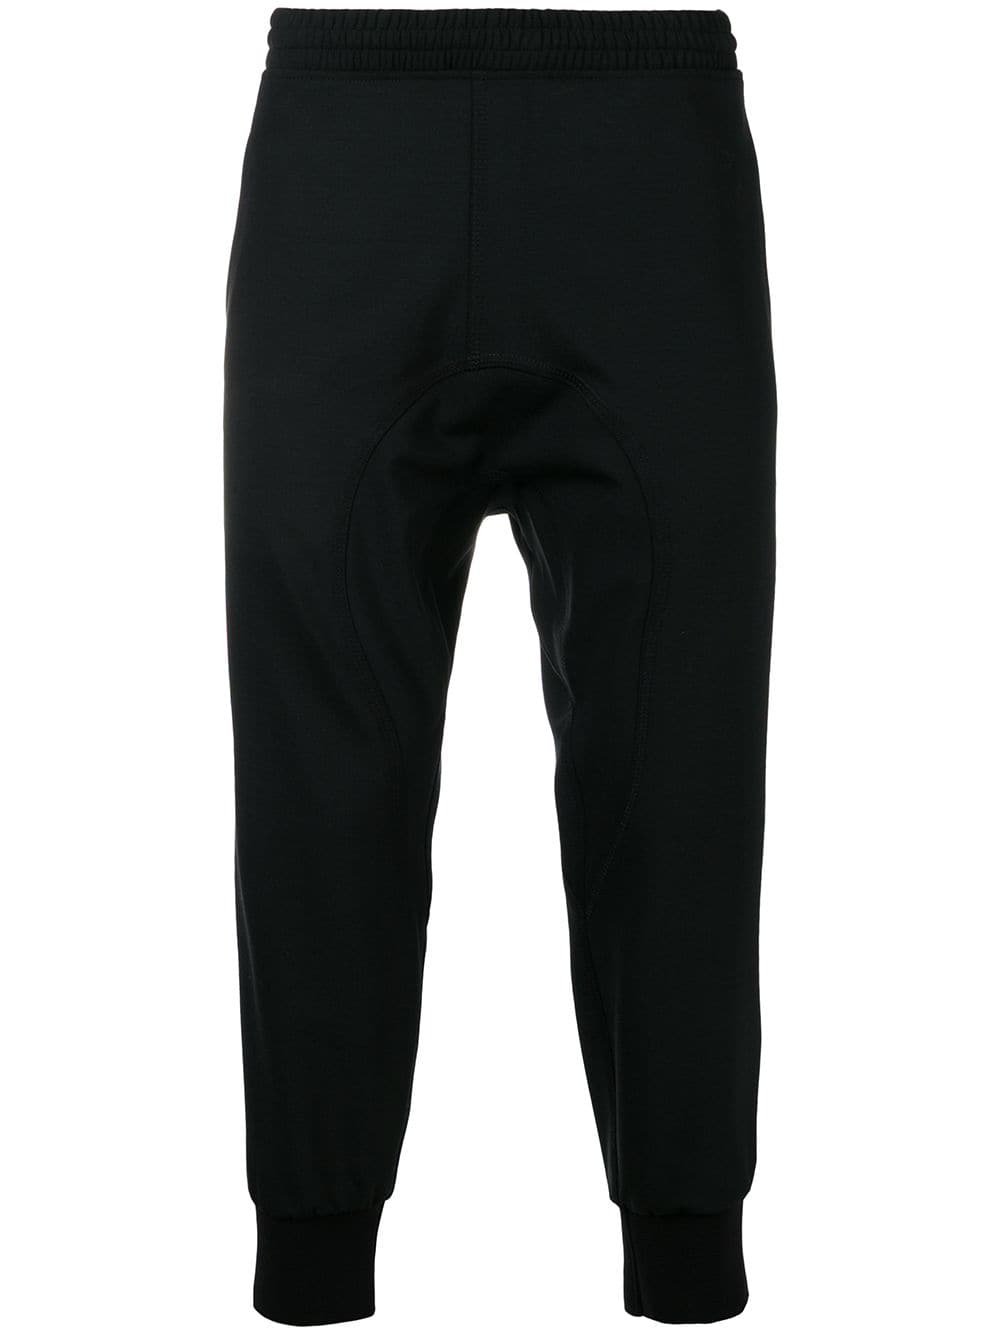 Sweatpants Codes for Men! Sporty outfits & recommended items ...